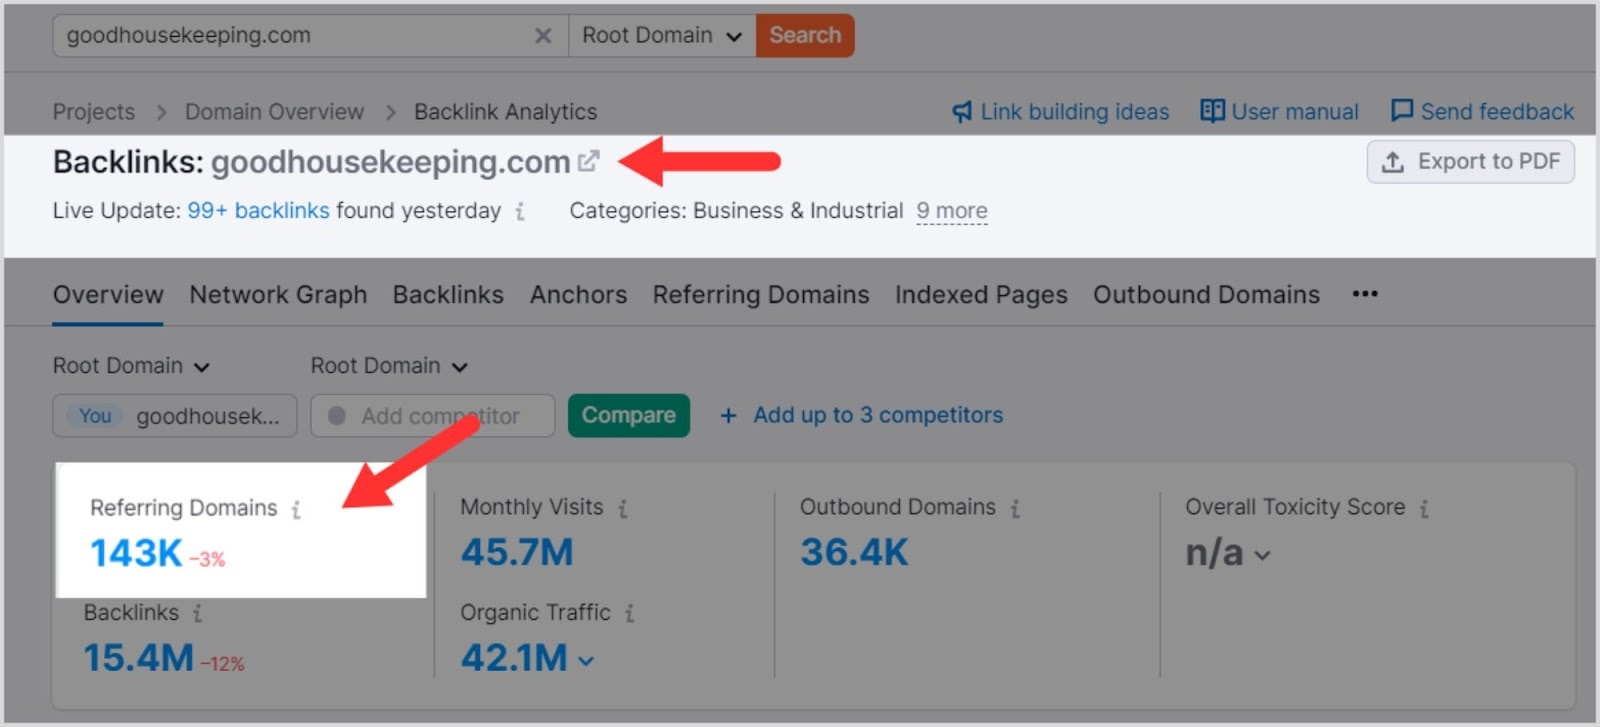 Referring domains on Good Housekeeping domain